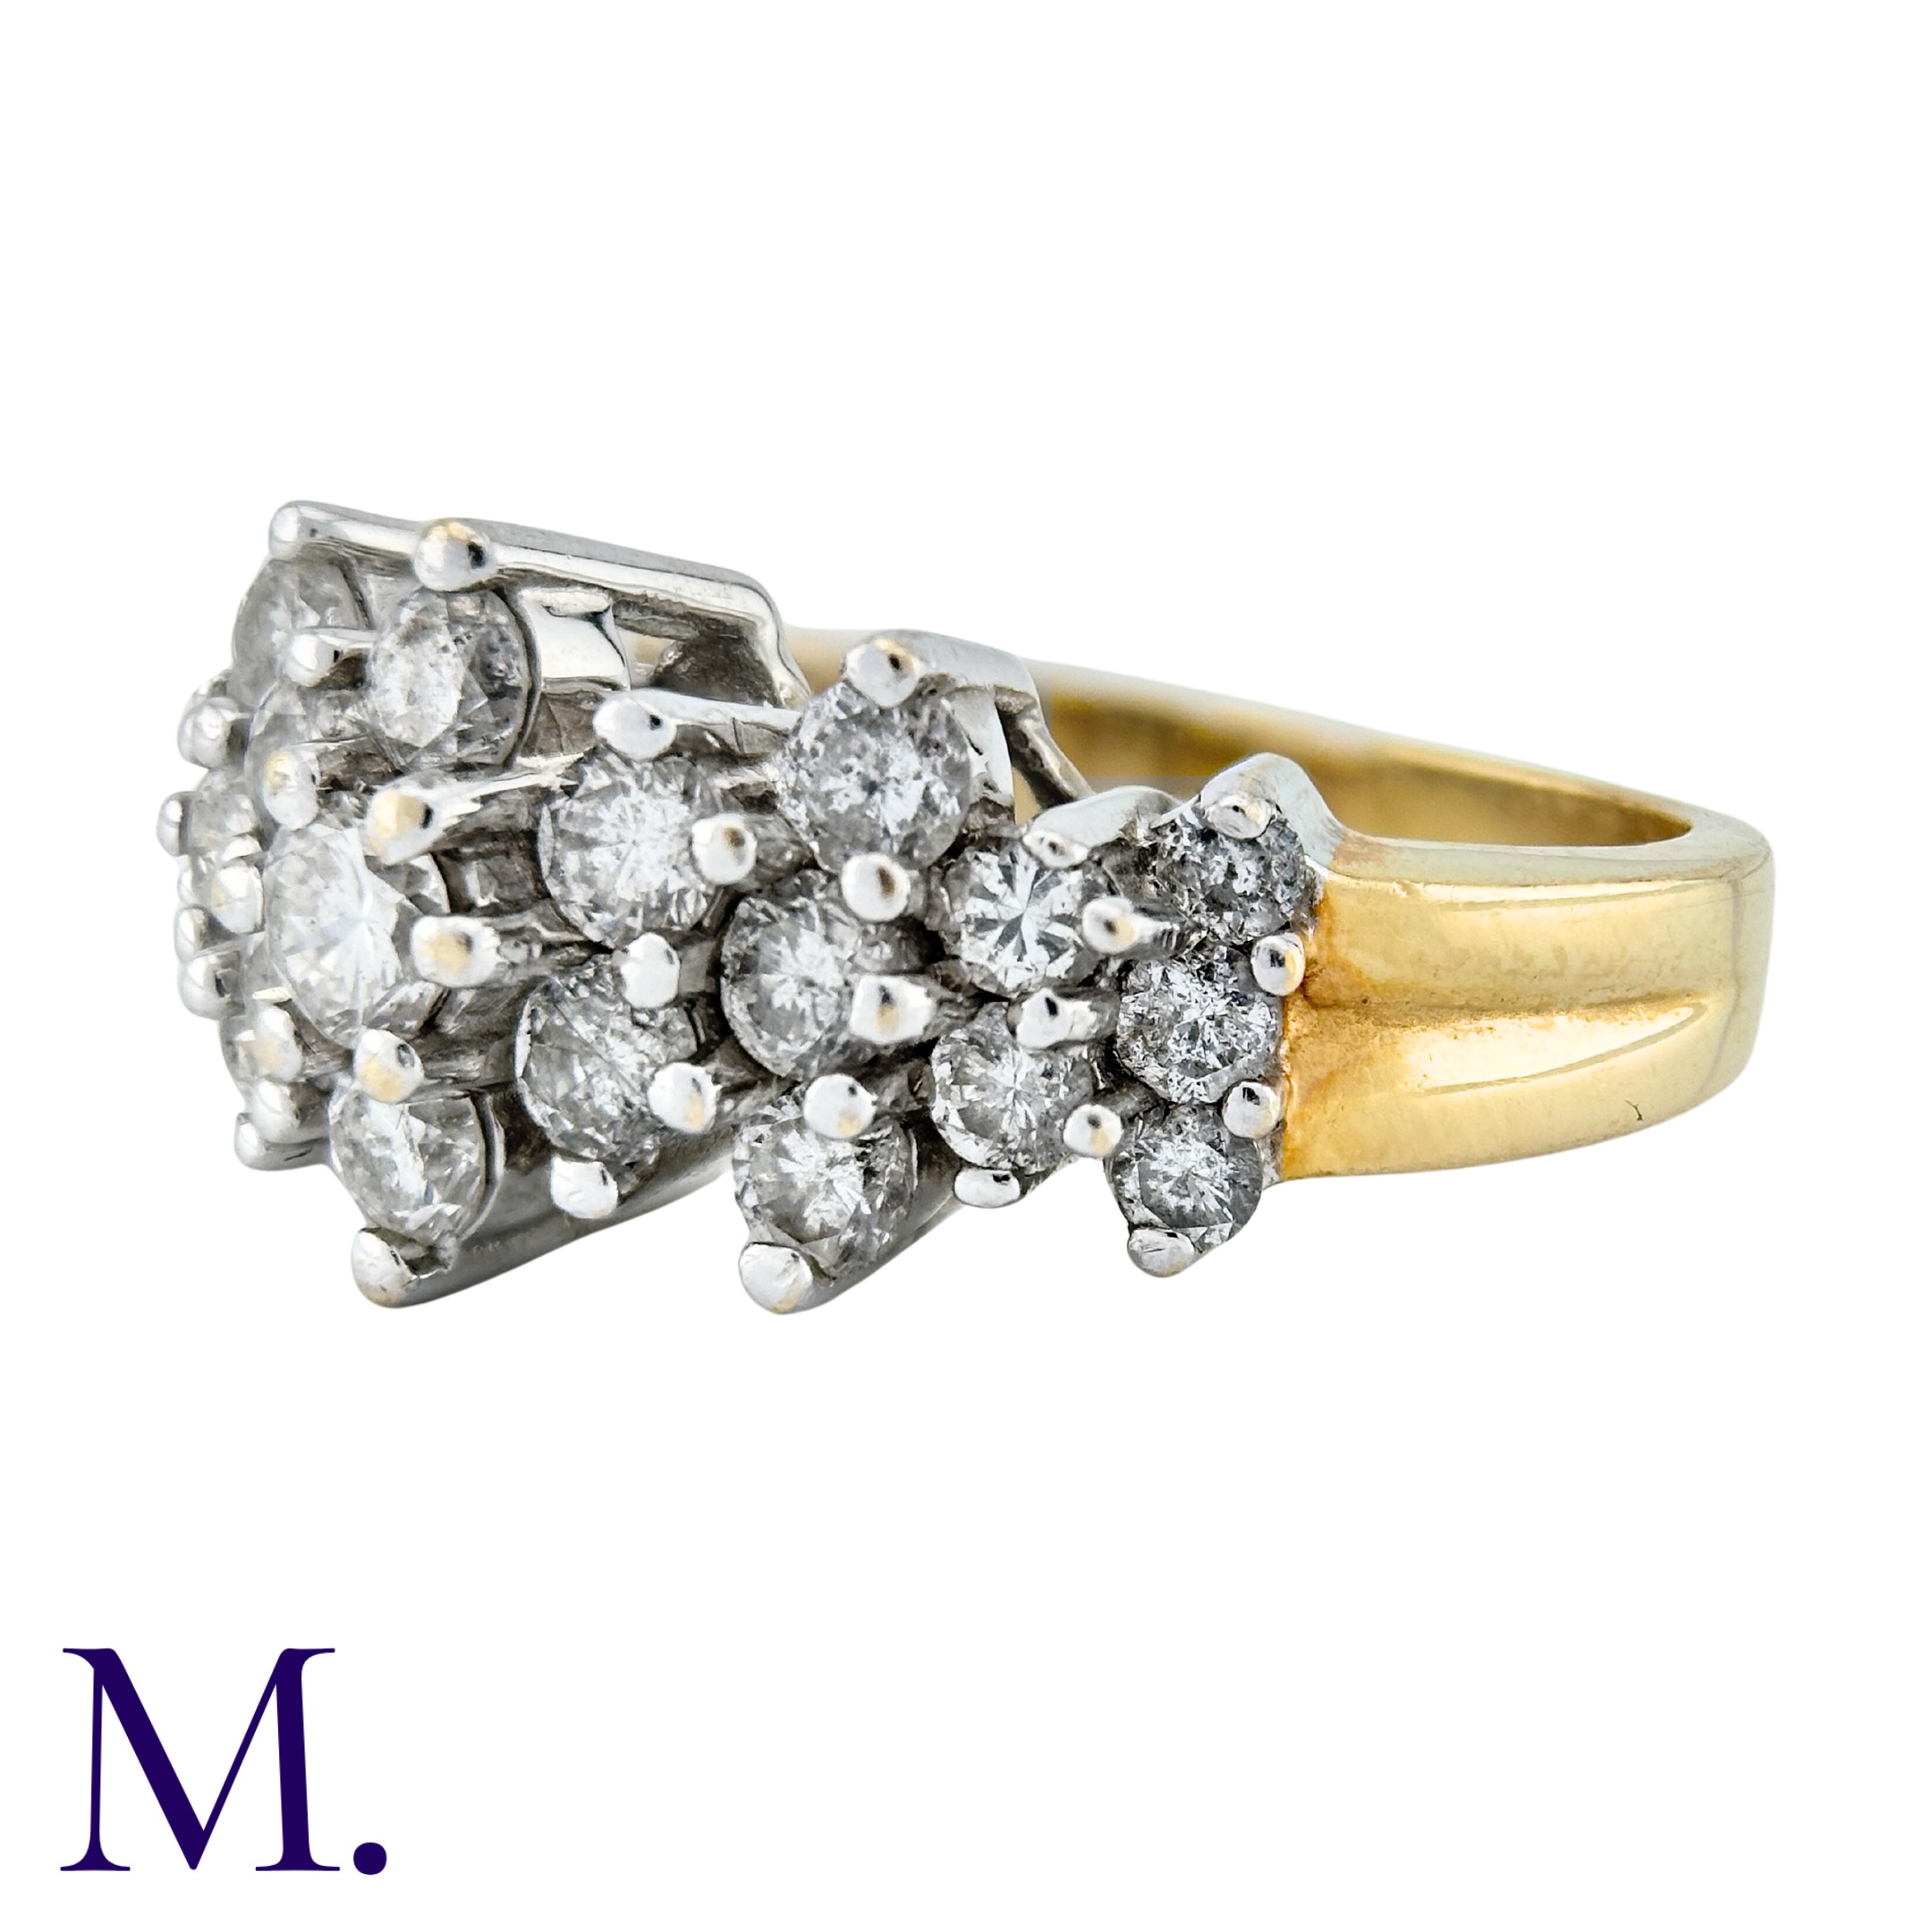 A Diamond Triple Cluster Ring in 9k yellow and white gold, comprising three clusters of diamonds all - Image 2 of 2